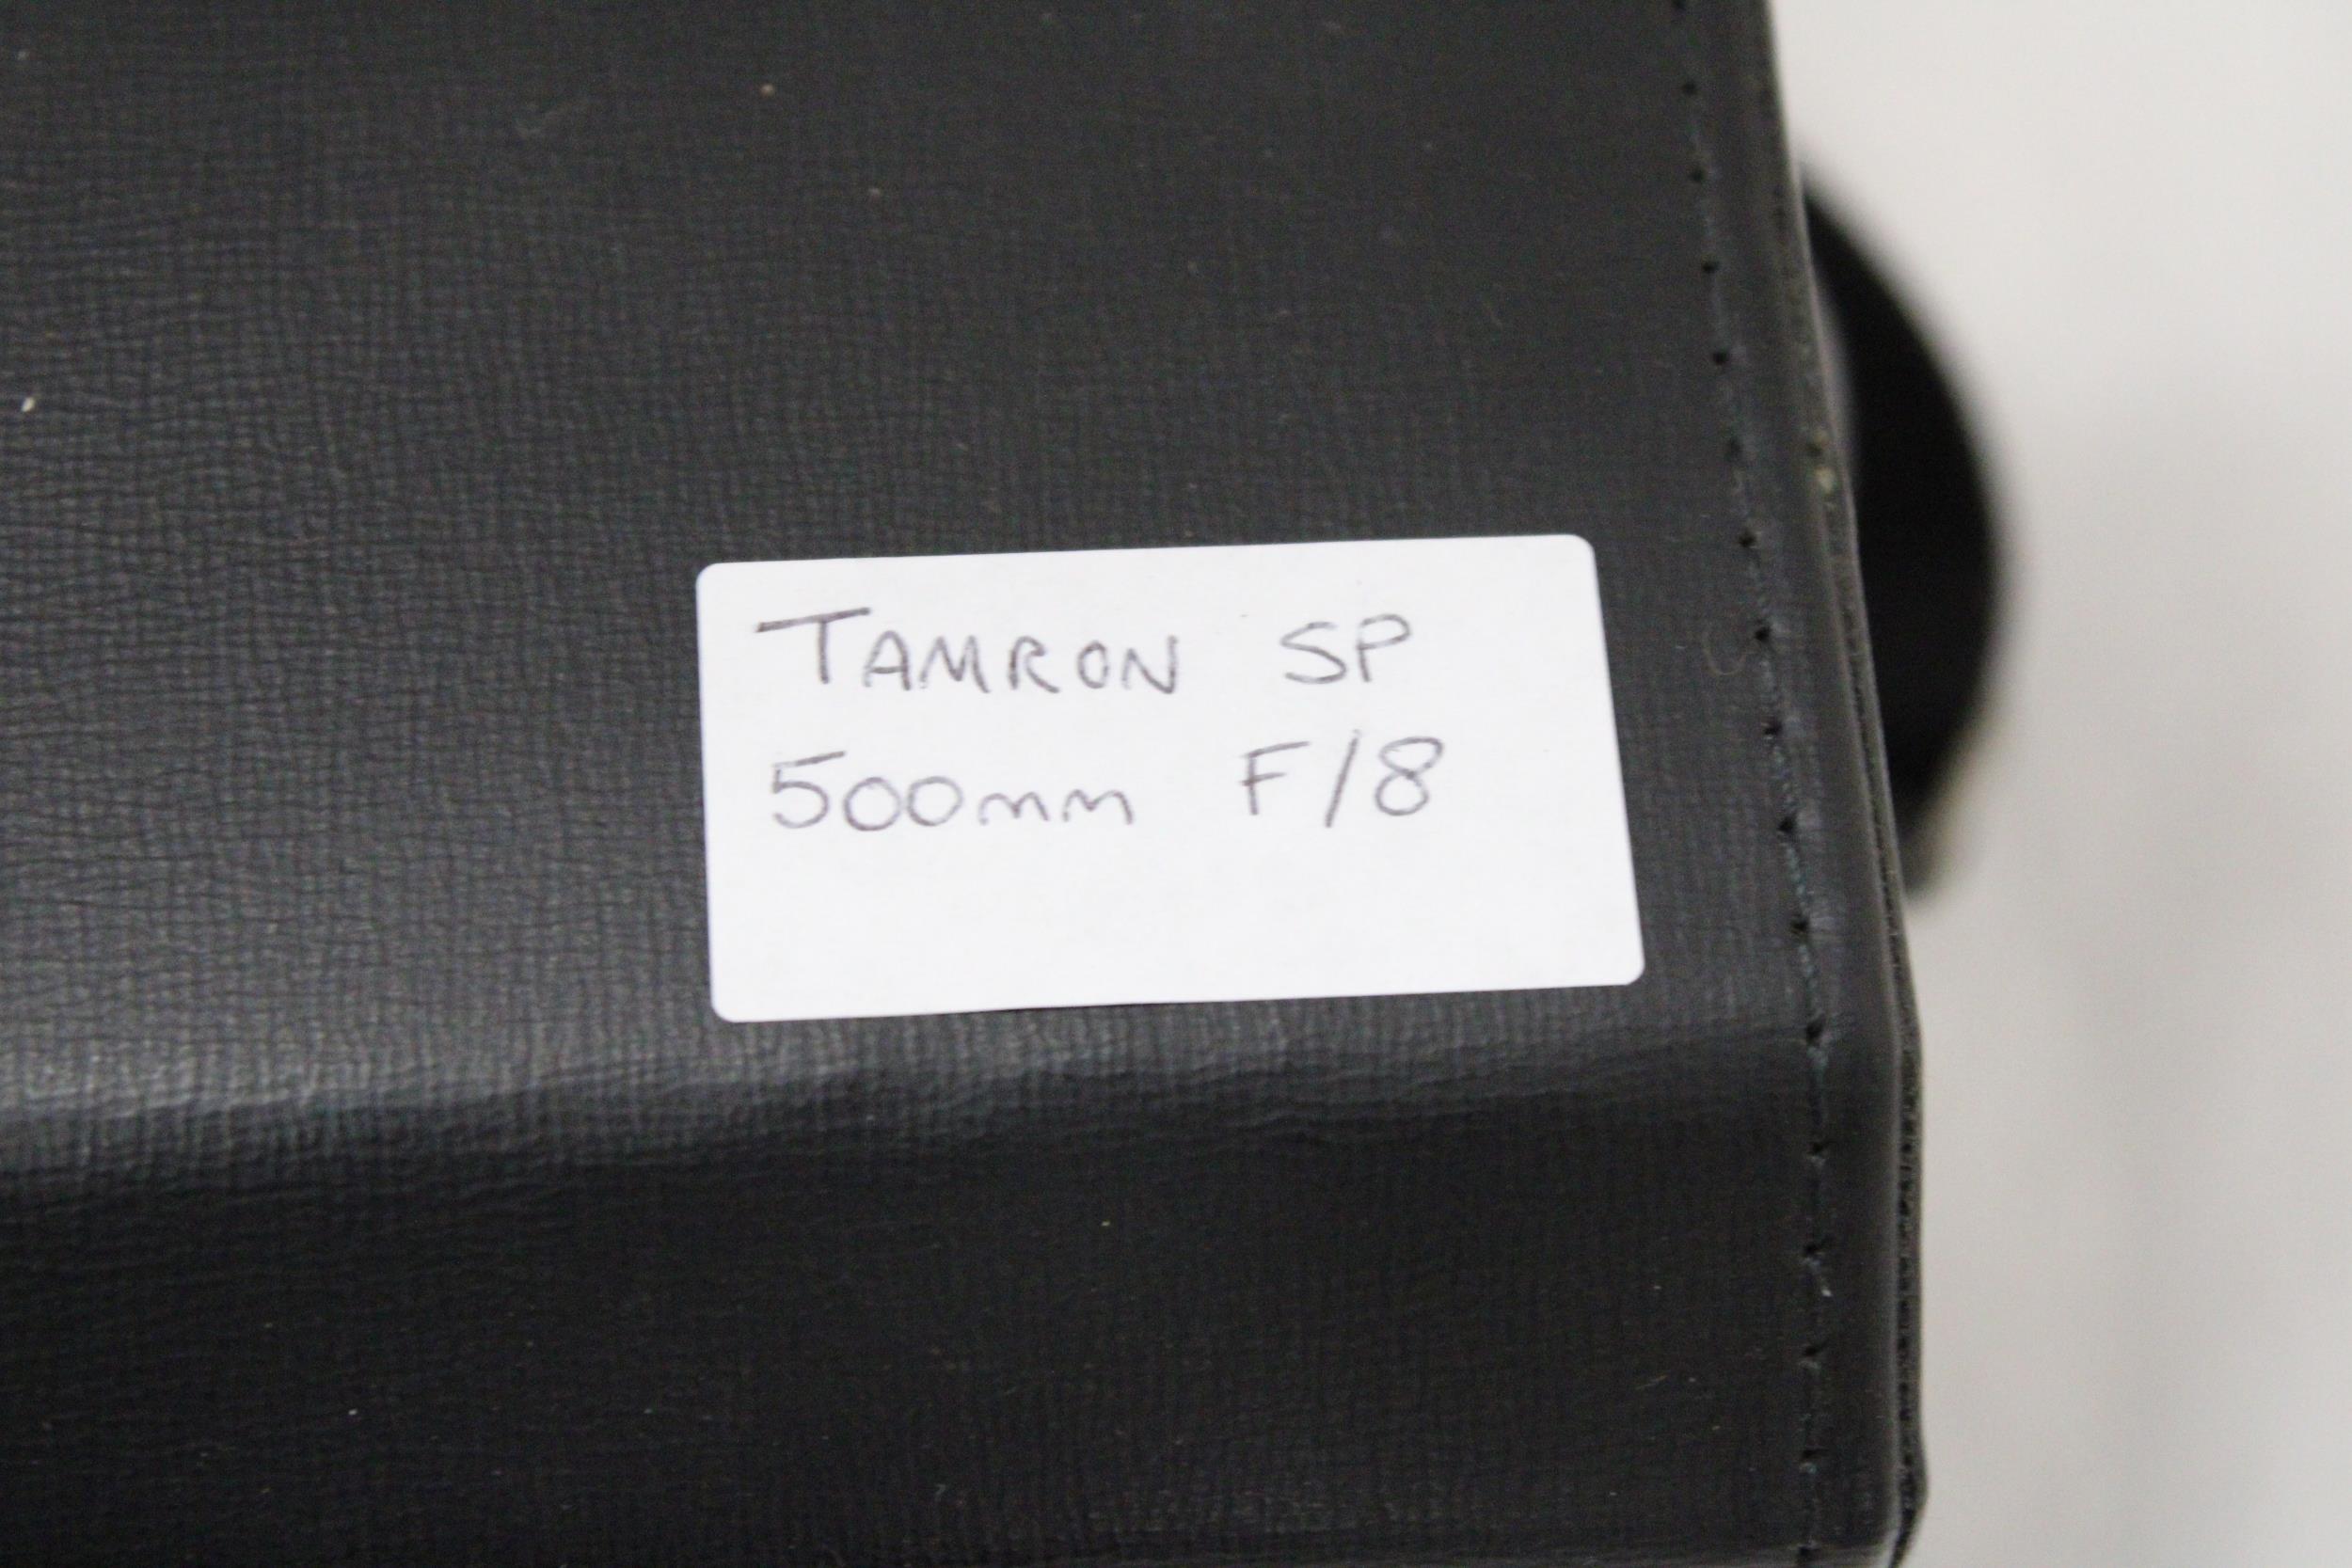 A TAMRON SP 500MM F/8 CAMERA LENS, IN CASE - Image 6 of 6